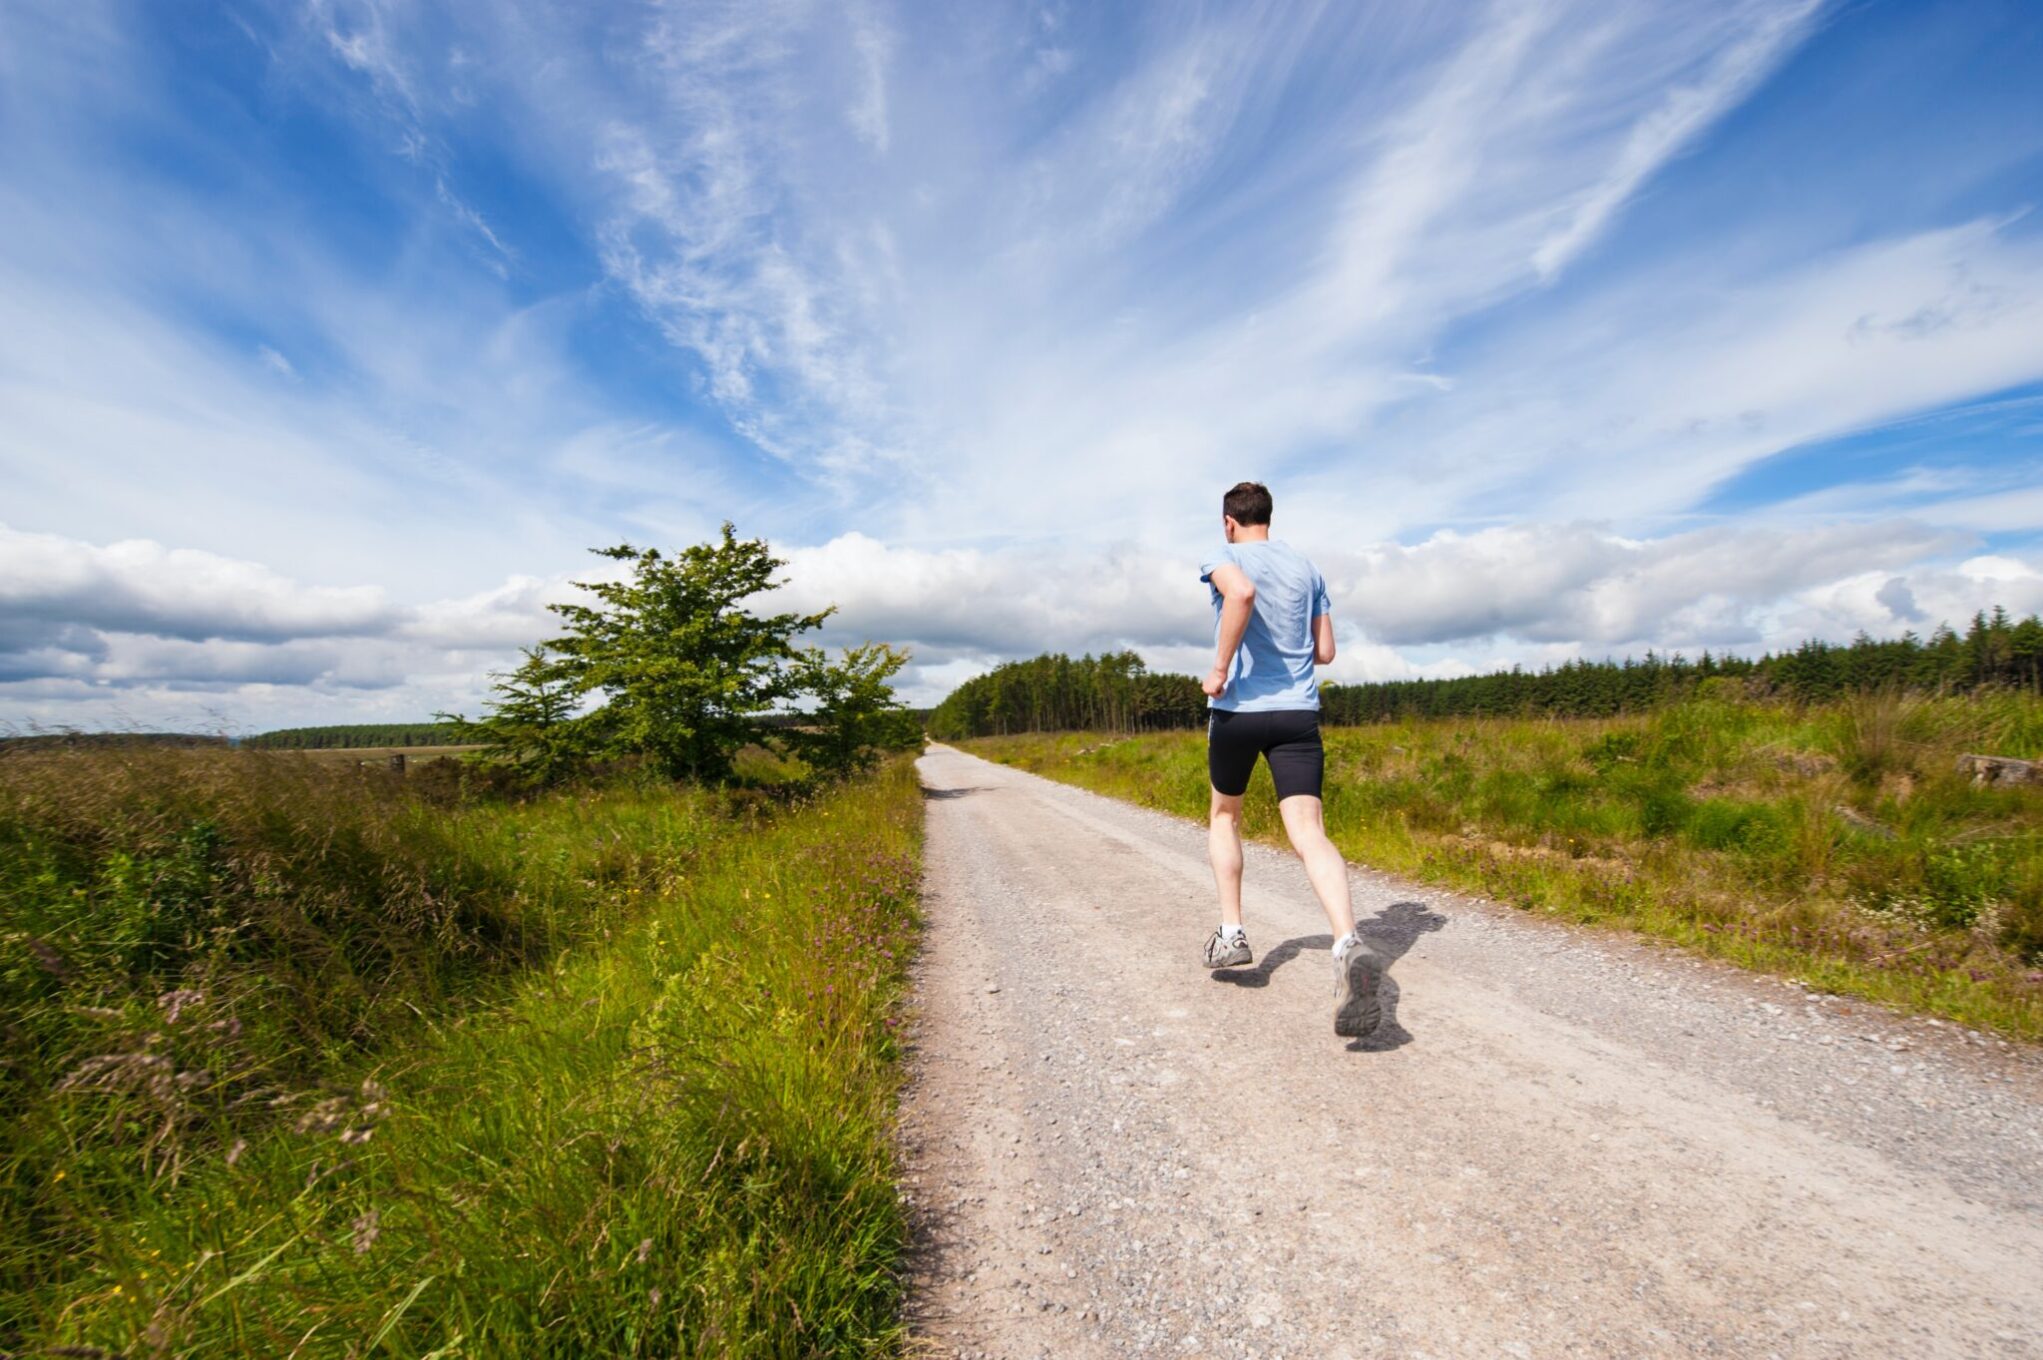 Man runs on dirt road out for a jog under bright blue sky